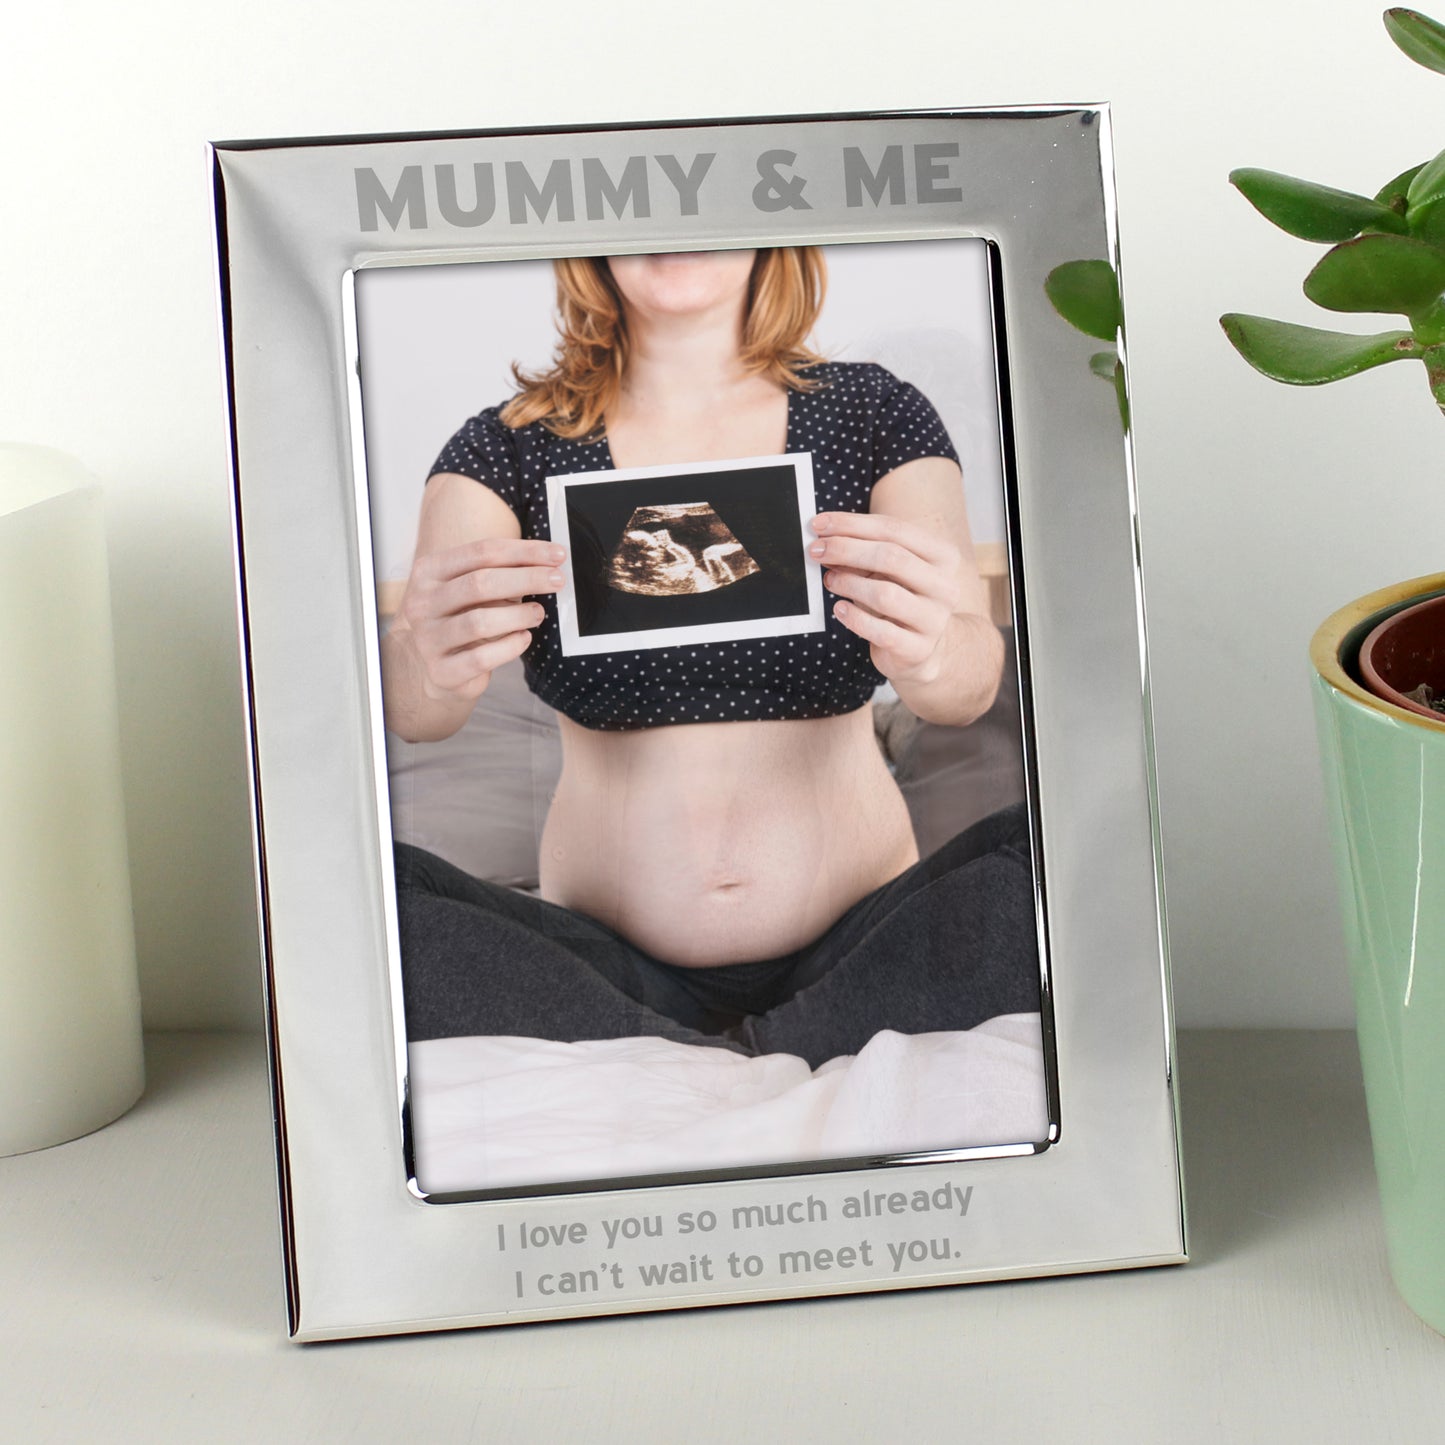 Personalised Silver 5x7 Mummy & Me Photo Frame - Personalise It!